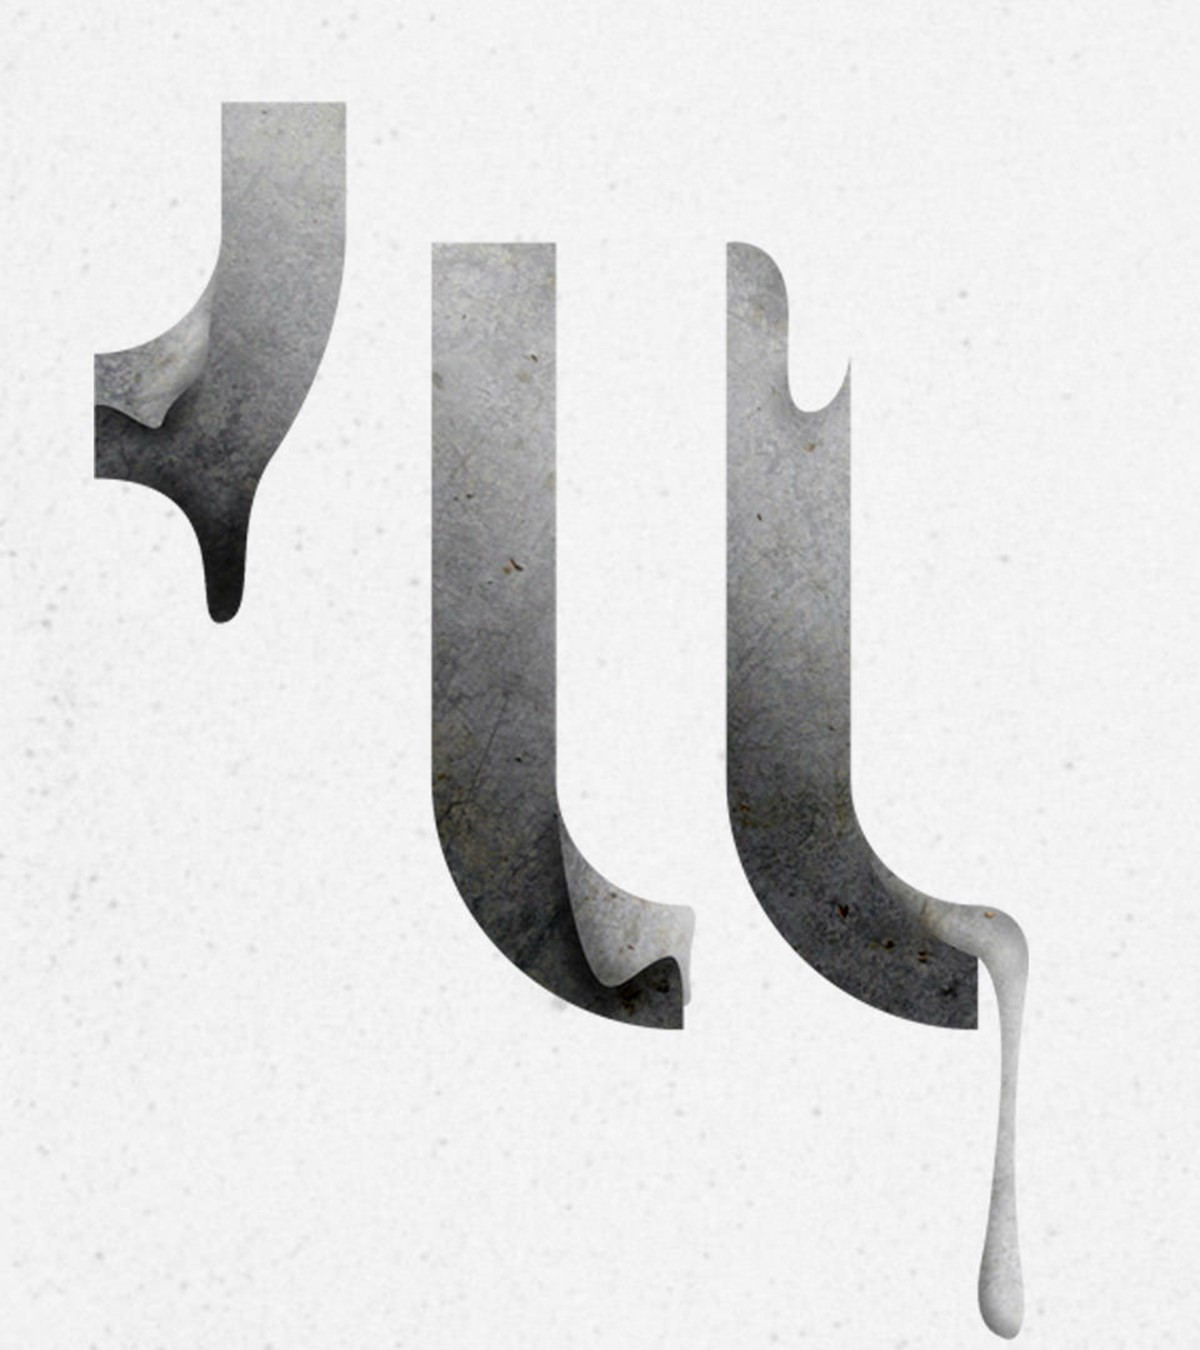 AIGA Quoted. Melting Dali letters LL by Superfried design studio.